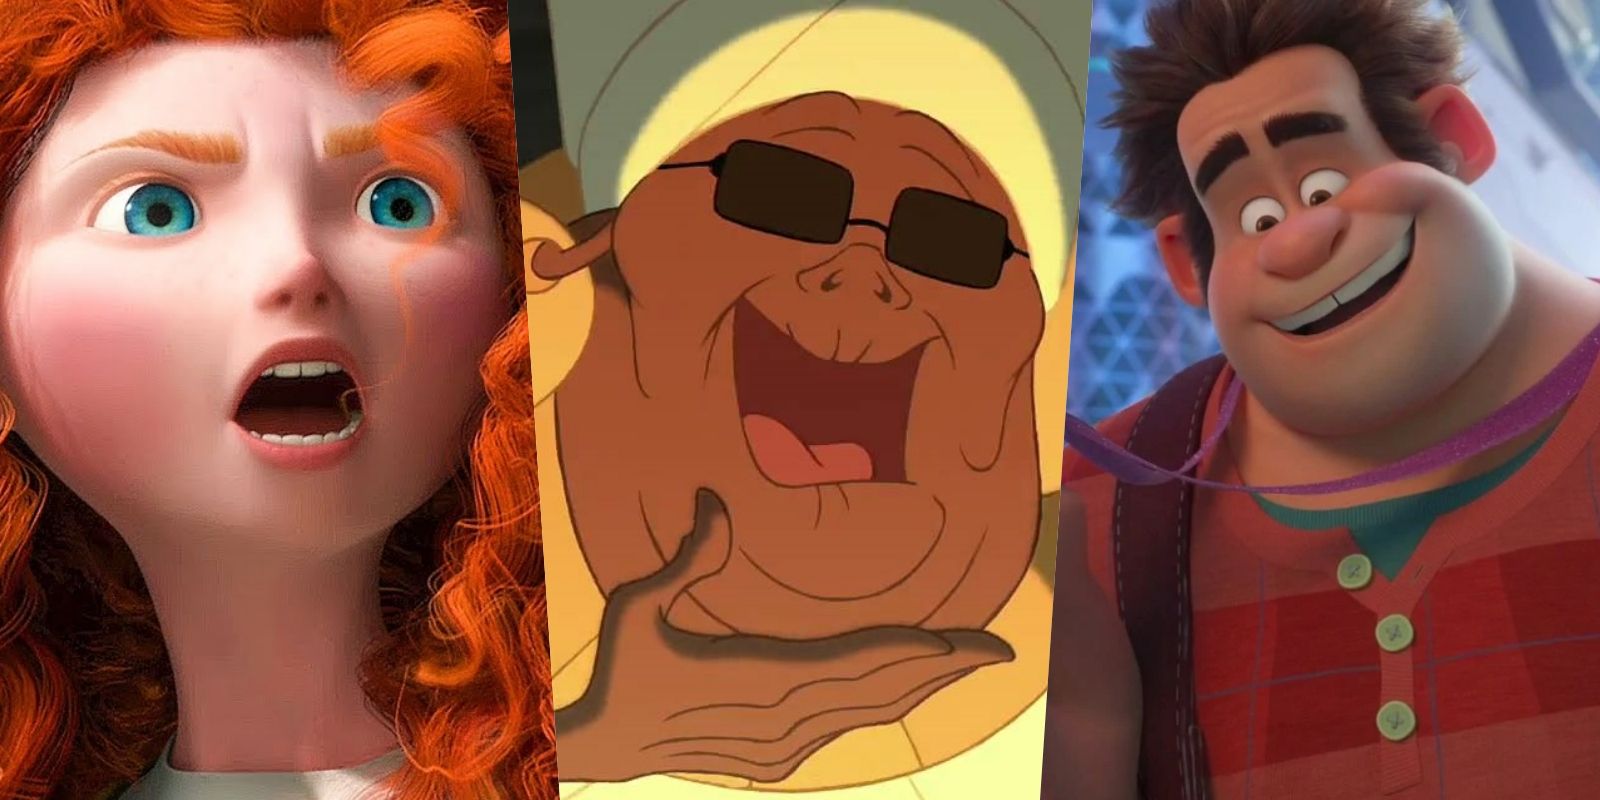 33 popular male Disney characters that are great role models 